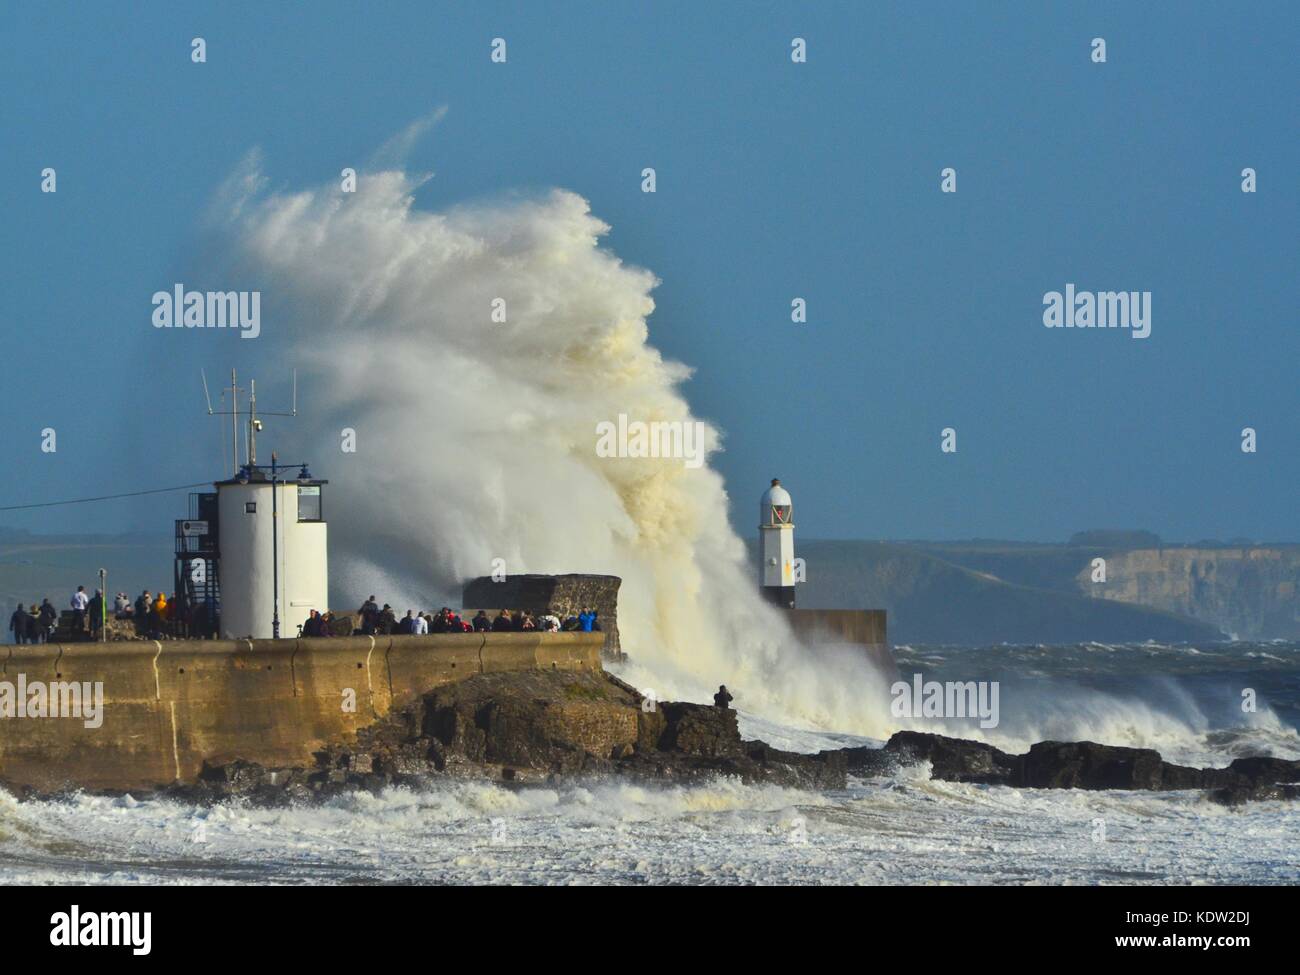 Porthcawl, Wales, UK. 16th October 2017. Ex-hurricane Ophelia whips up waves which break over sea defences on her way past Wales with high winds even in Porthcawl miles from the storm's centre in Ireland. Picture credit: Ian Homer/ Alamy Live News Stock Photo